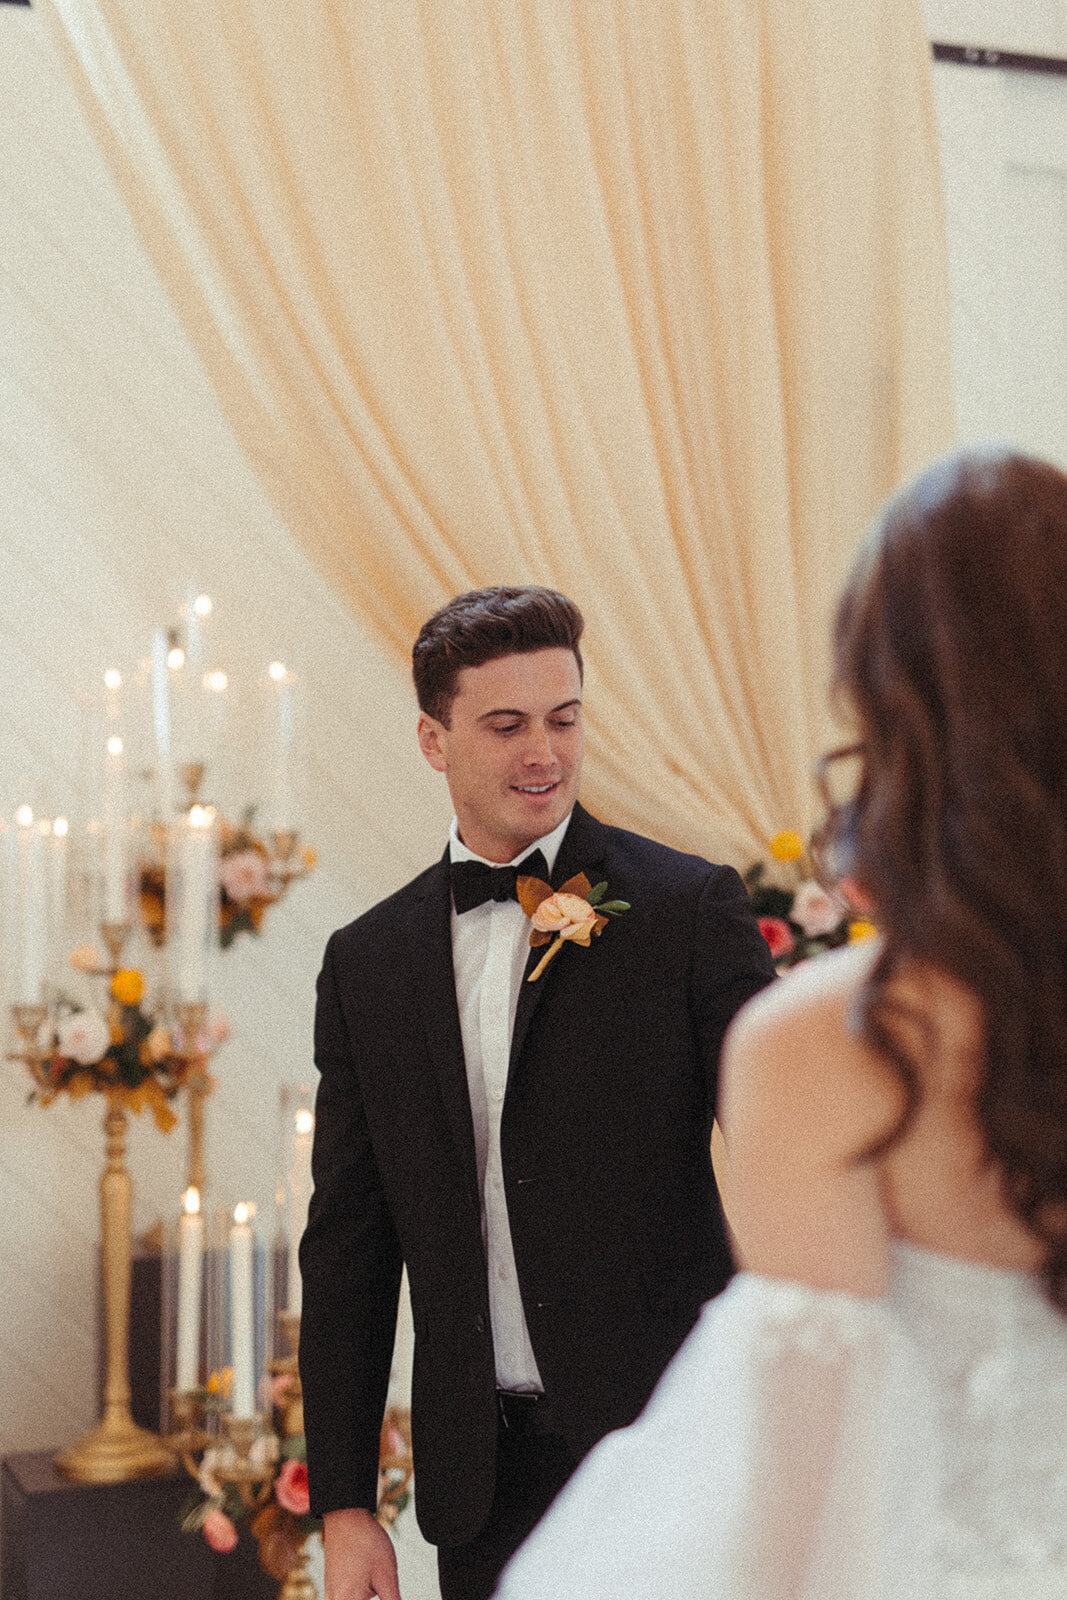 Bride and groom wearing a black tuxedo and white wedding gown standing by lit candles and peach-colored curtains.